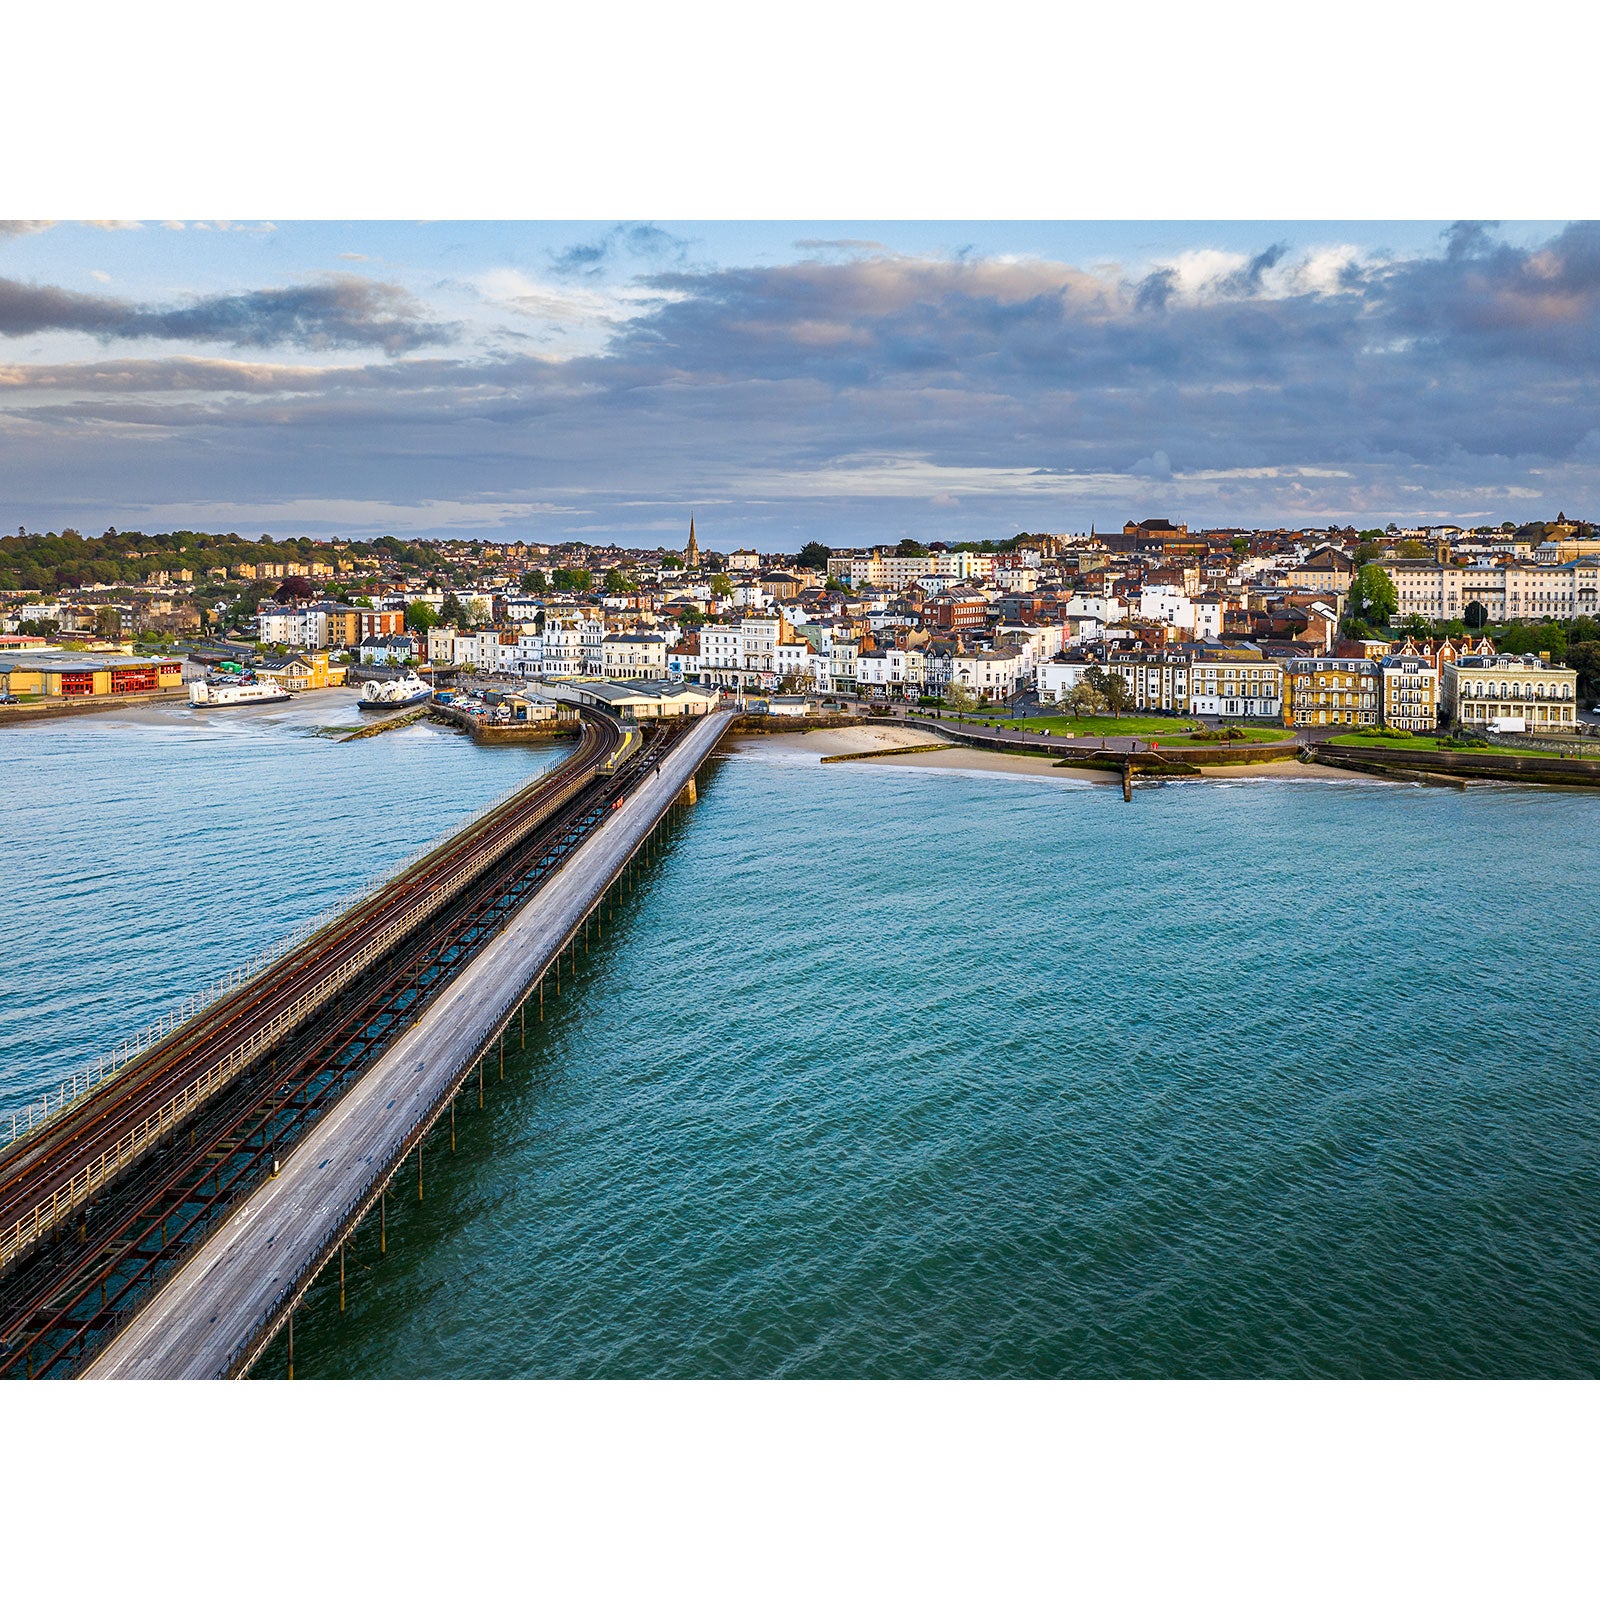 Aerial view of a coastal town with a long pier extending into the sea at dusk, captured by Steve using Ryde from Available Light Photography.